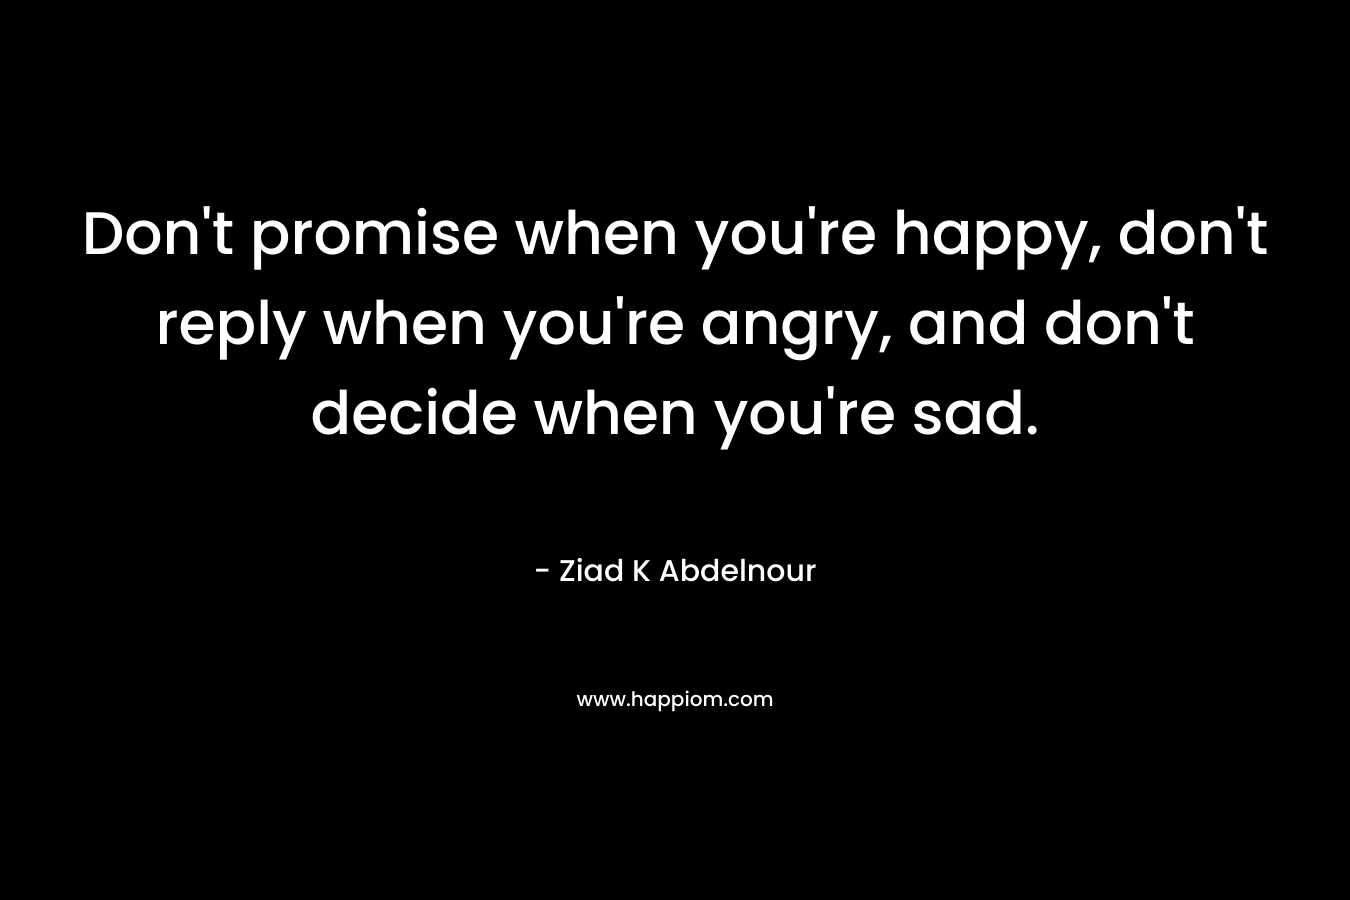 Don't promise when you're happy, don't reply when you're angry, and don't decide when you're sad.